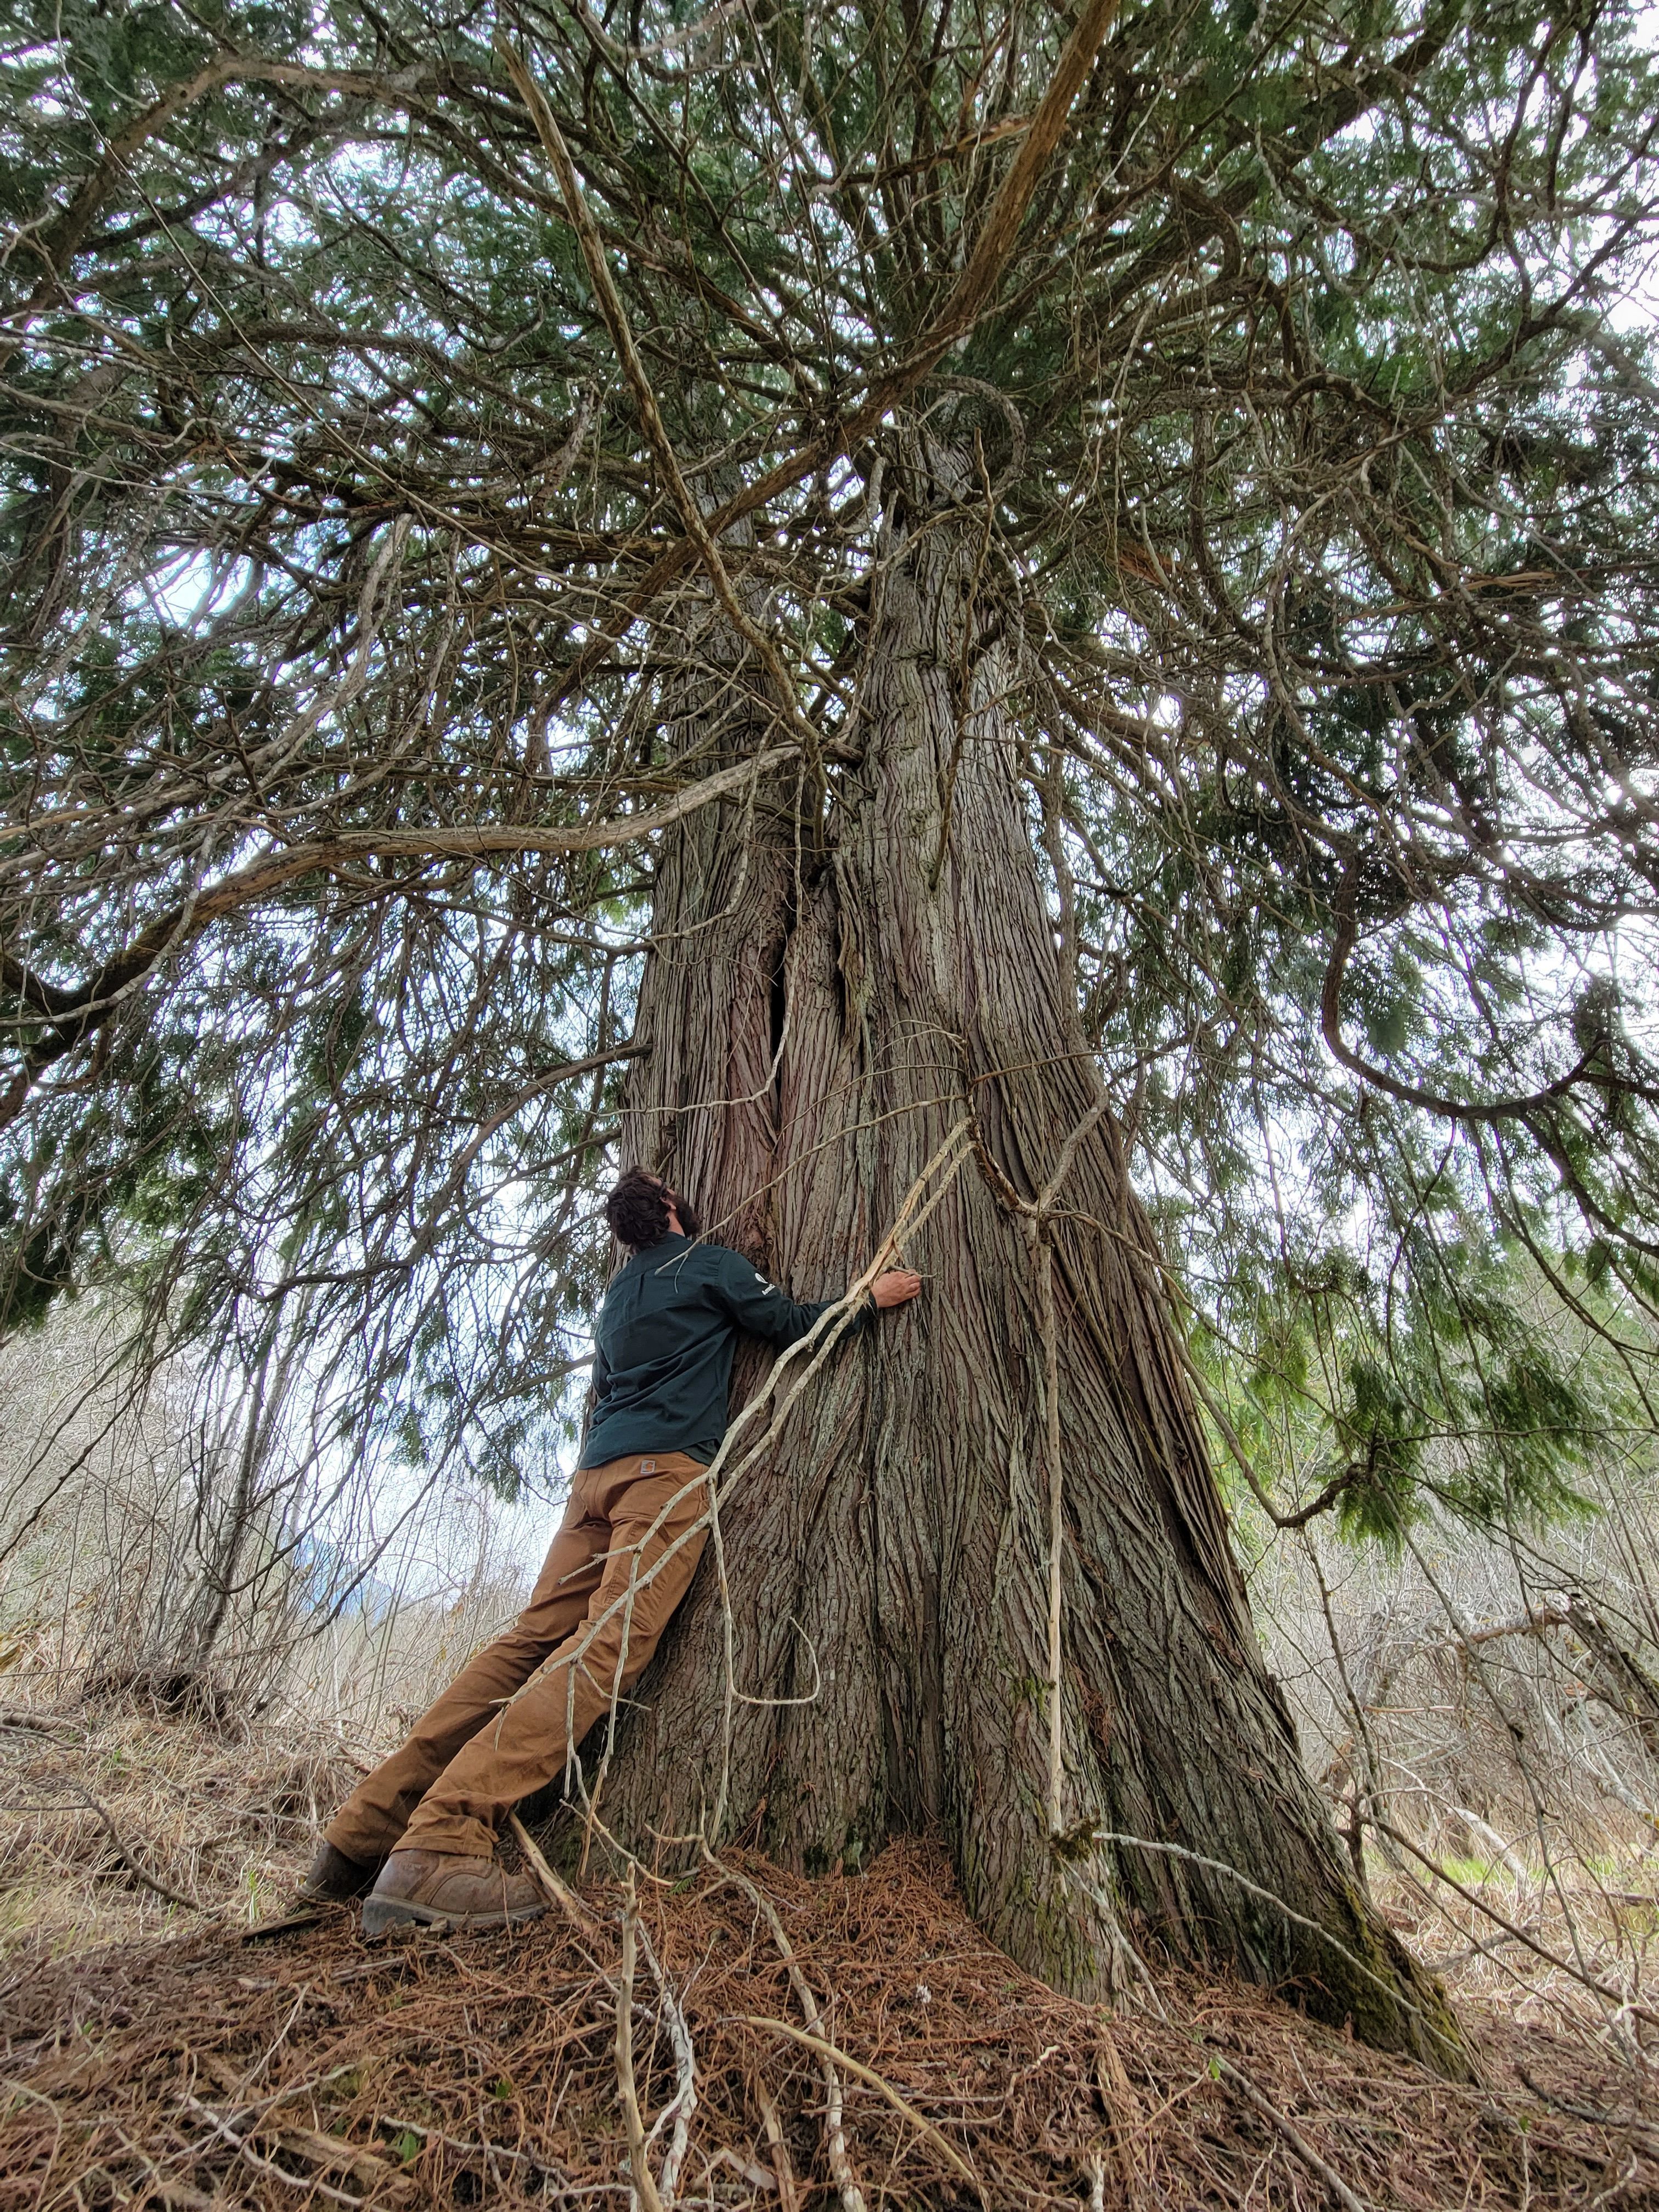 A crew leader hugs a large cedar tree, towering high into the air.